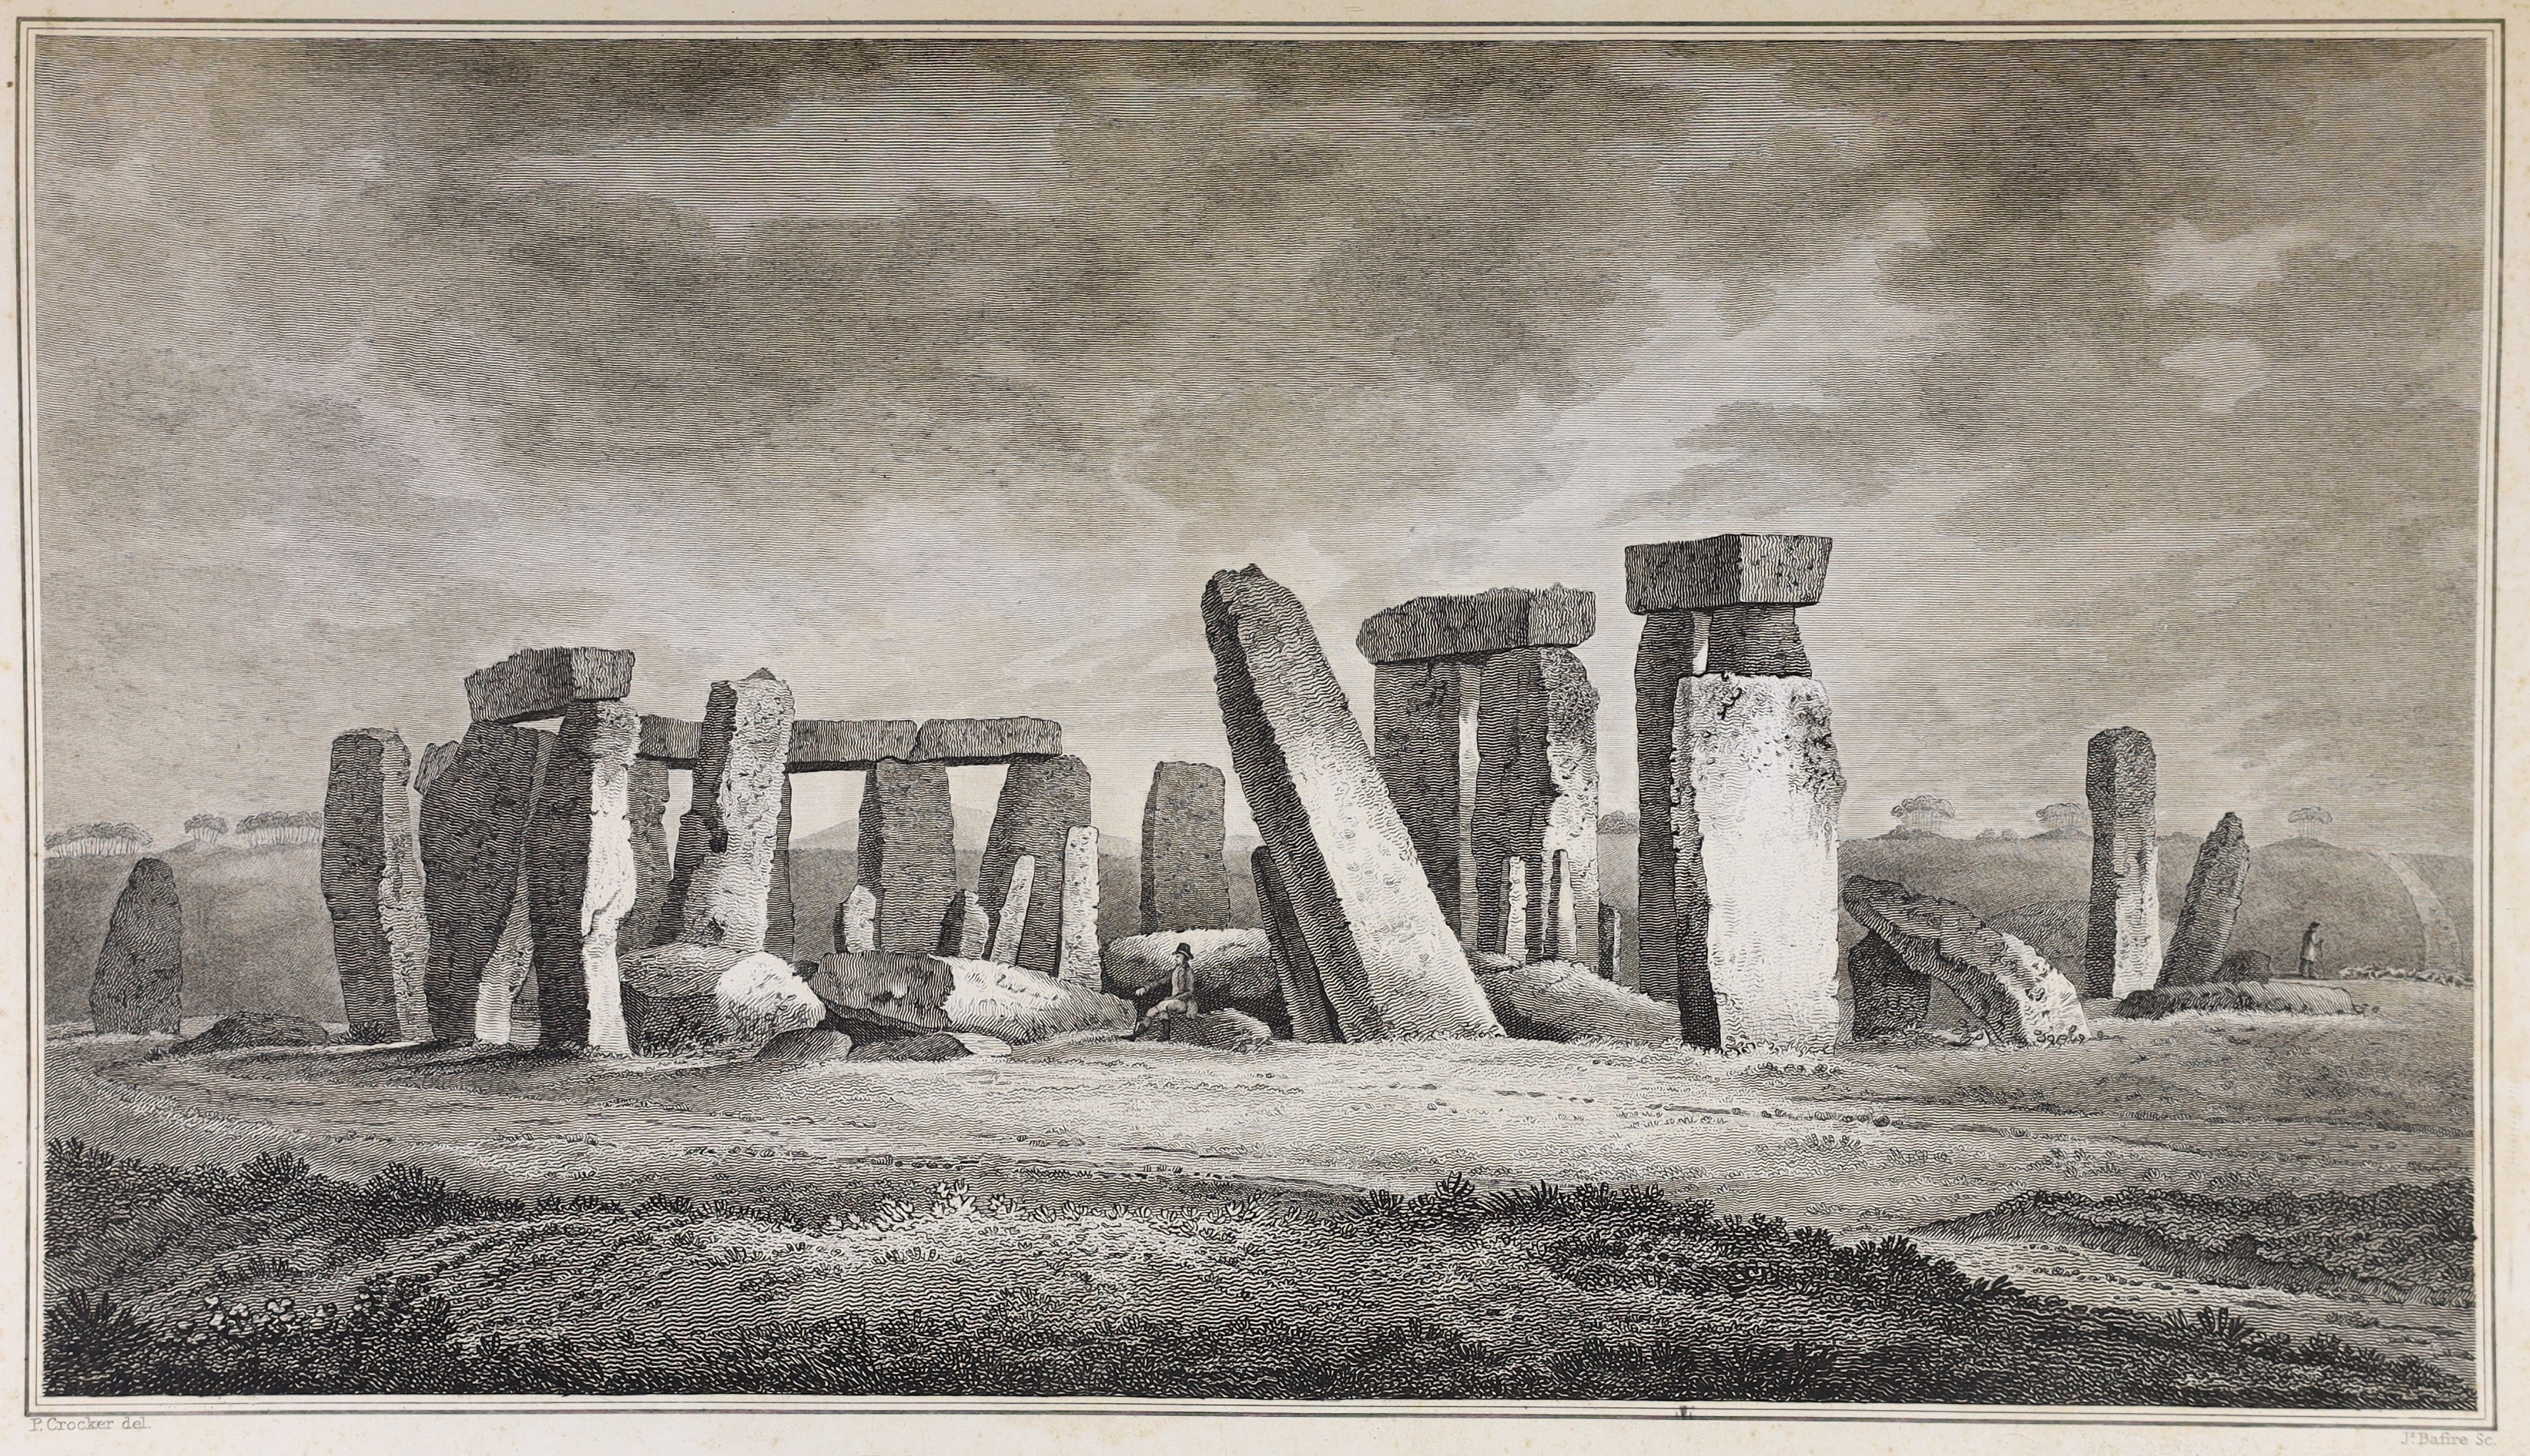 WILTSHIRE - Hoare, Richard Colt, Sir - The History of Modern Wiltshire - Hundreds of Everley, Ambresbury and Underditch, [covers Stonehenge], folio, half calf, with a double folding page map and 16 plates, boards scuffed